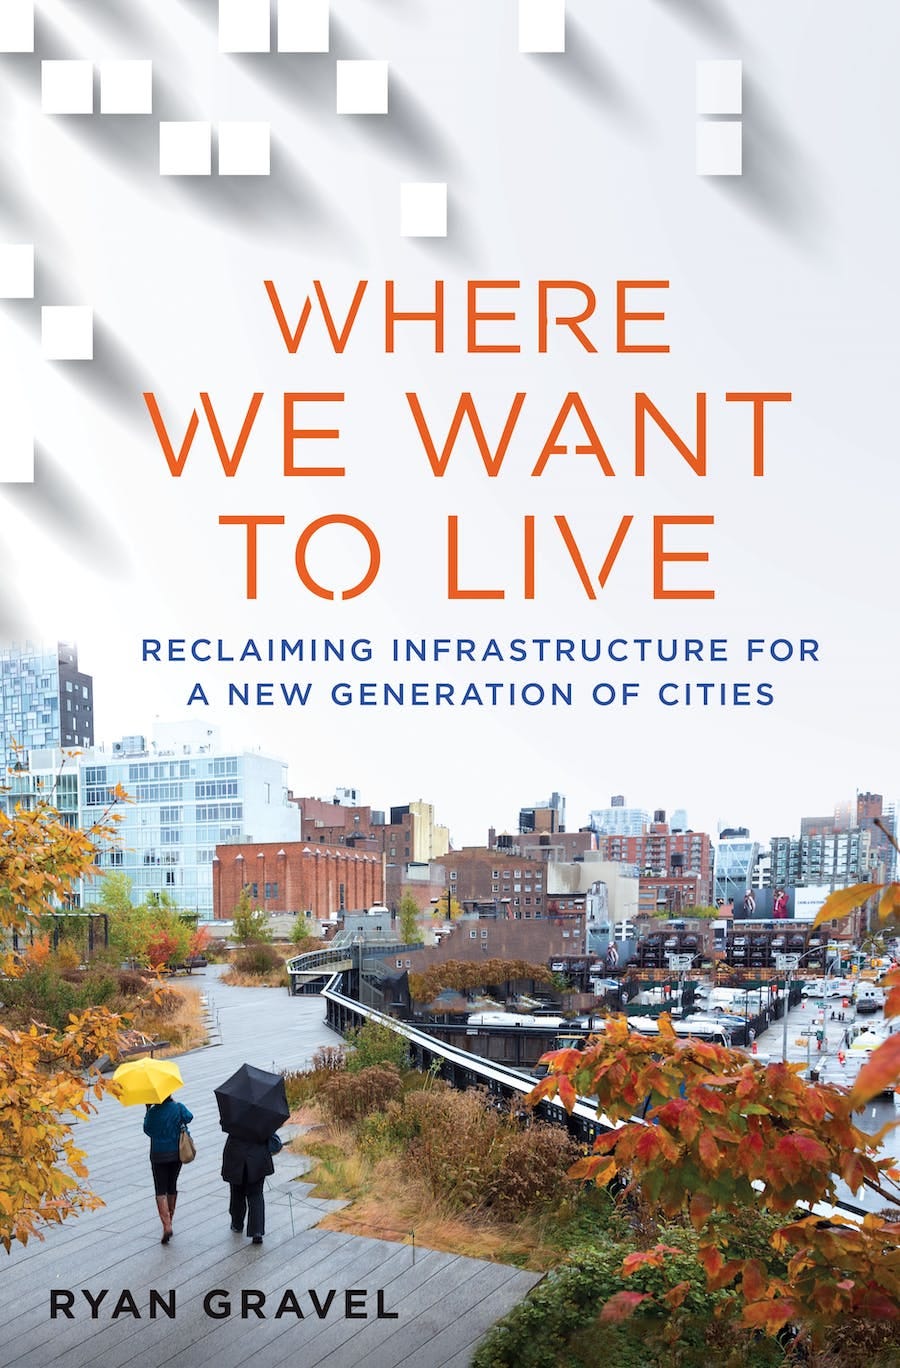 Where we want to live (book cover)